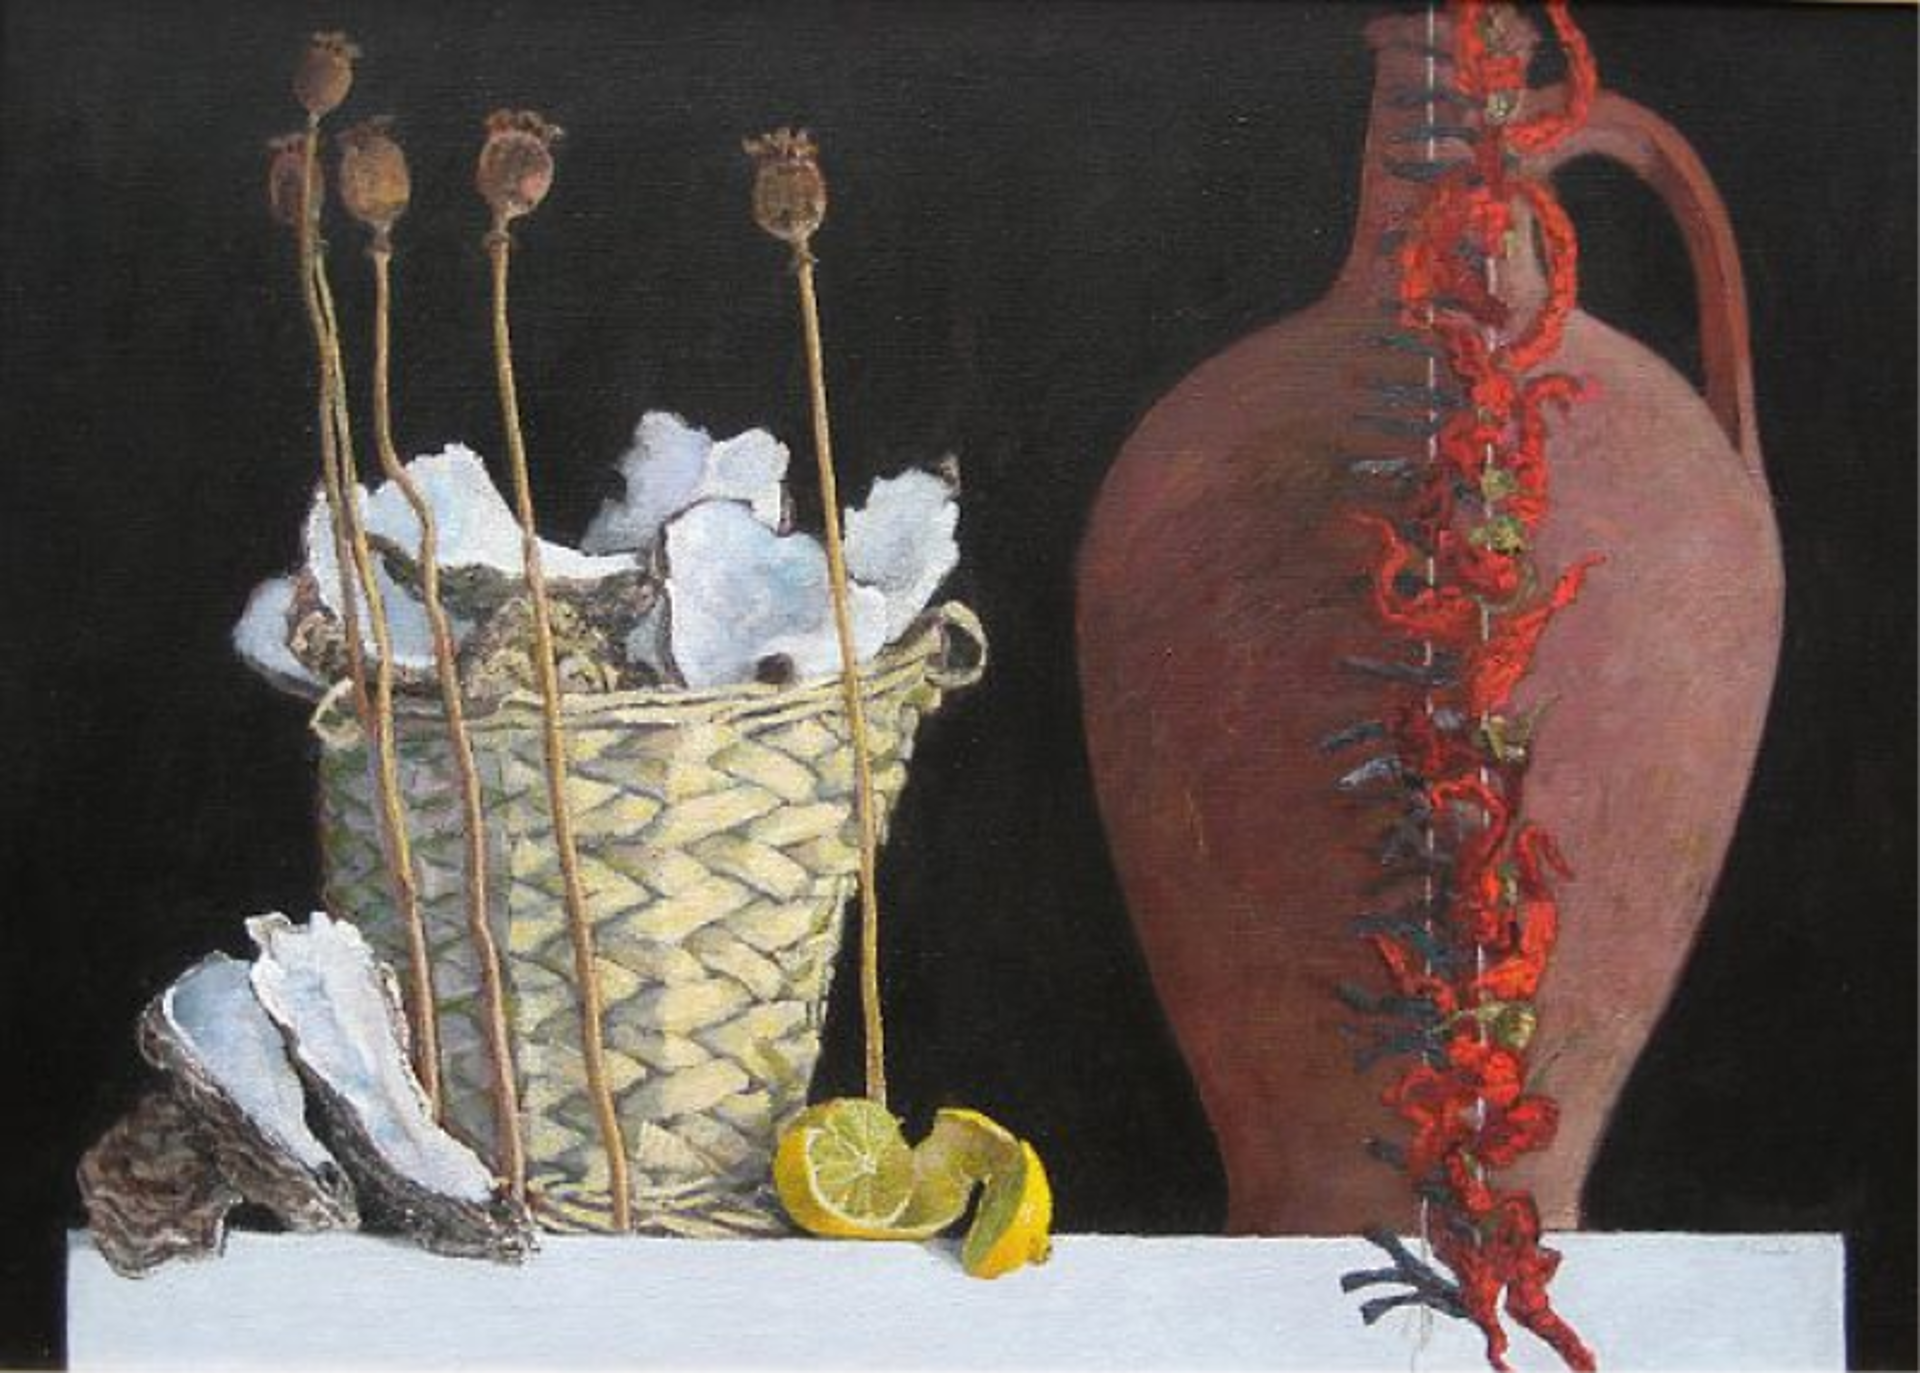 Still life painting of a basket of oyster shells, a string of chili peppers and other objects